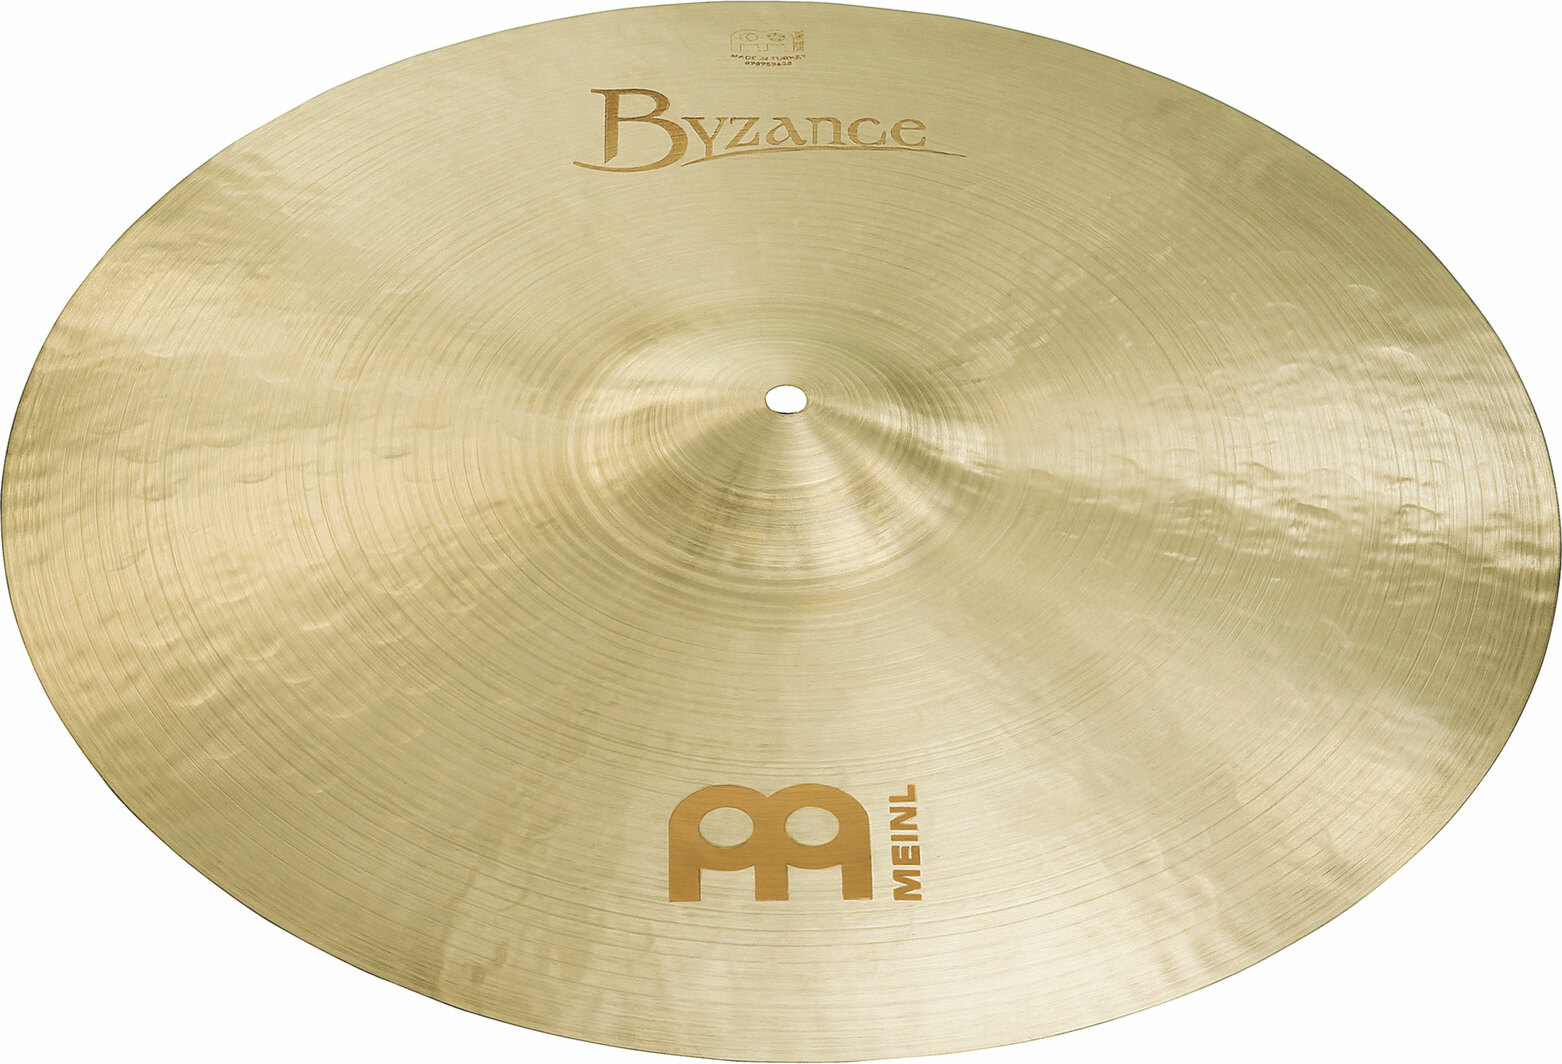 Meinl Byzance Jazz Ride 20 Medium Thin - 20 Pouces - Ride cymbal - Main picture